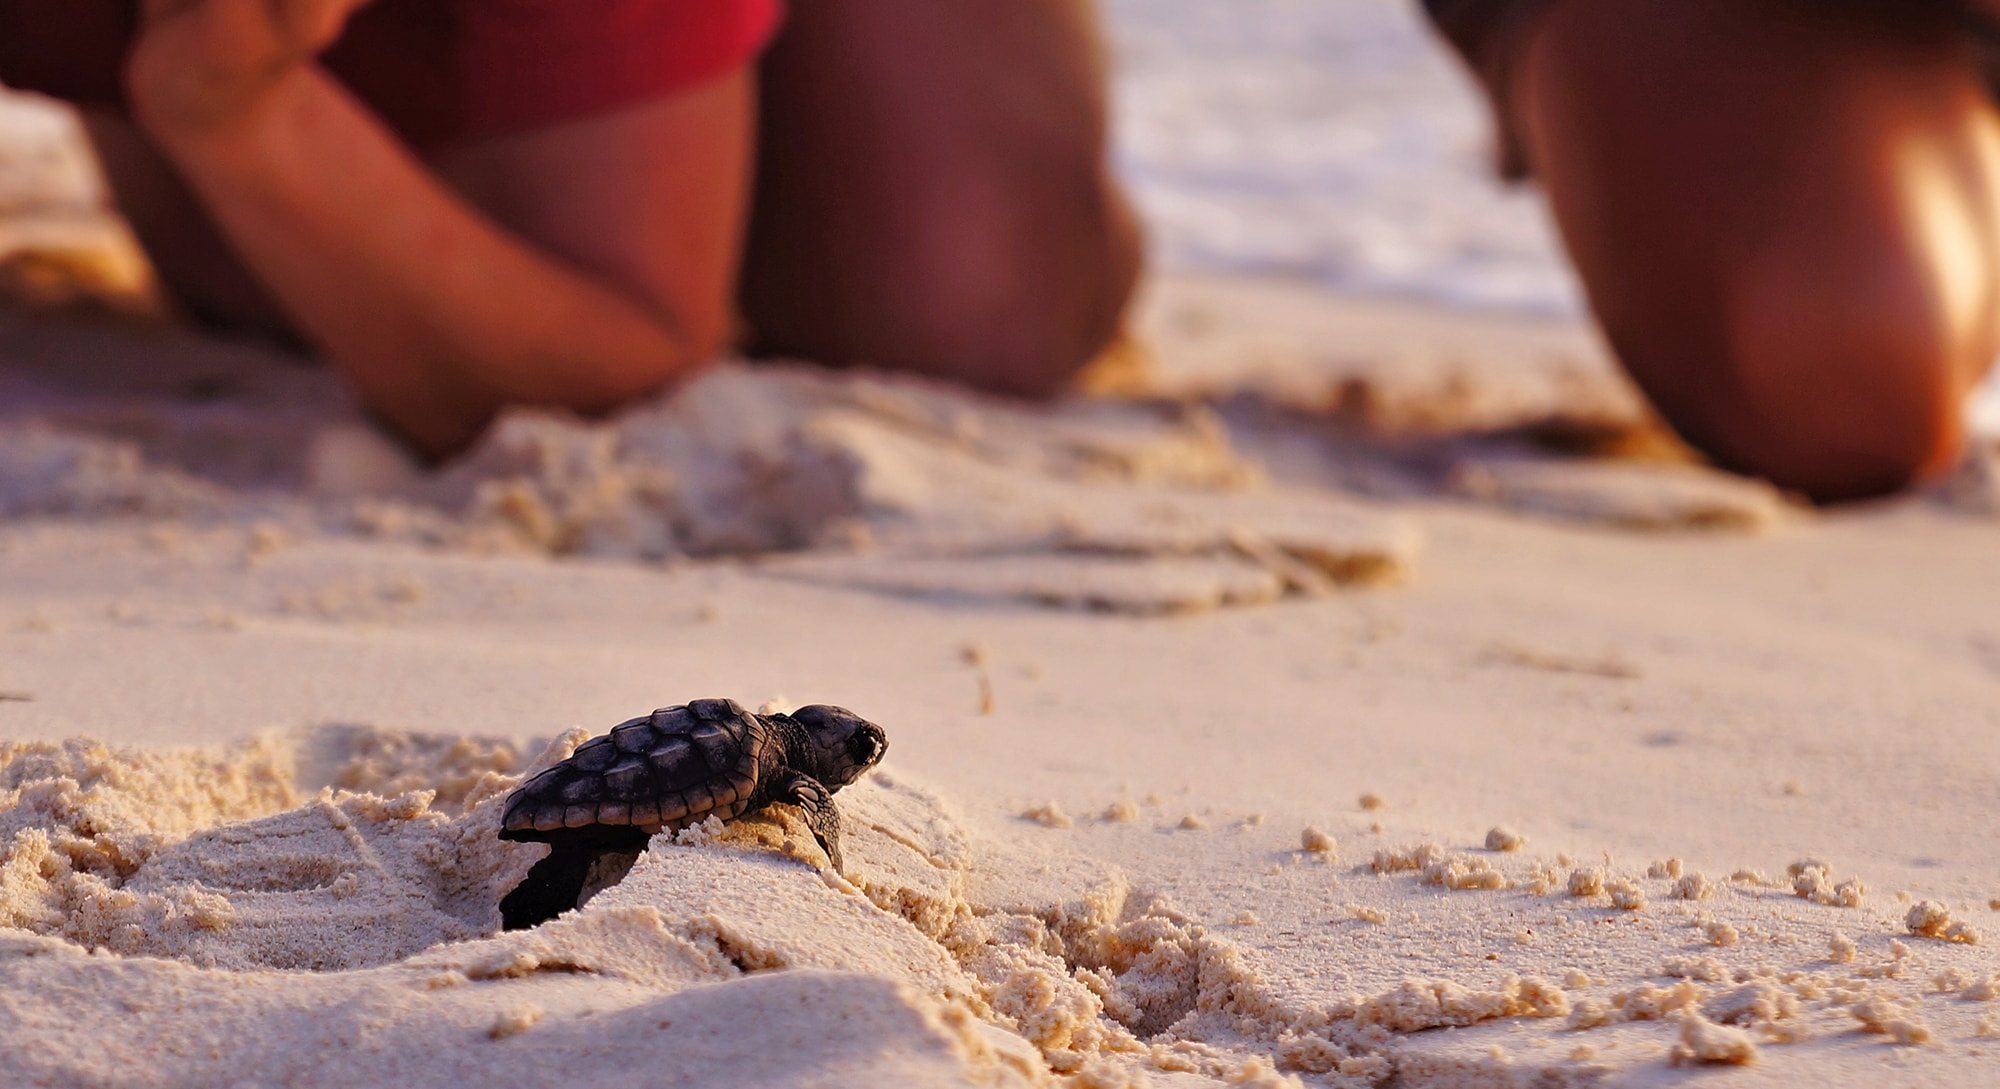 A baby sea turtle after hatching on the beach